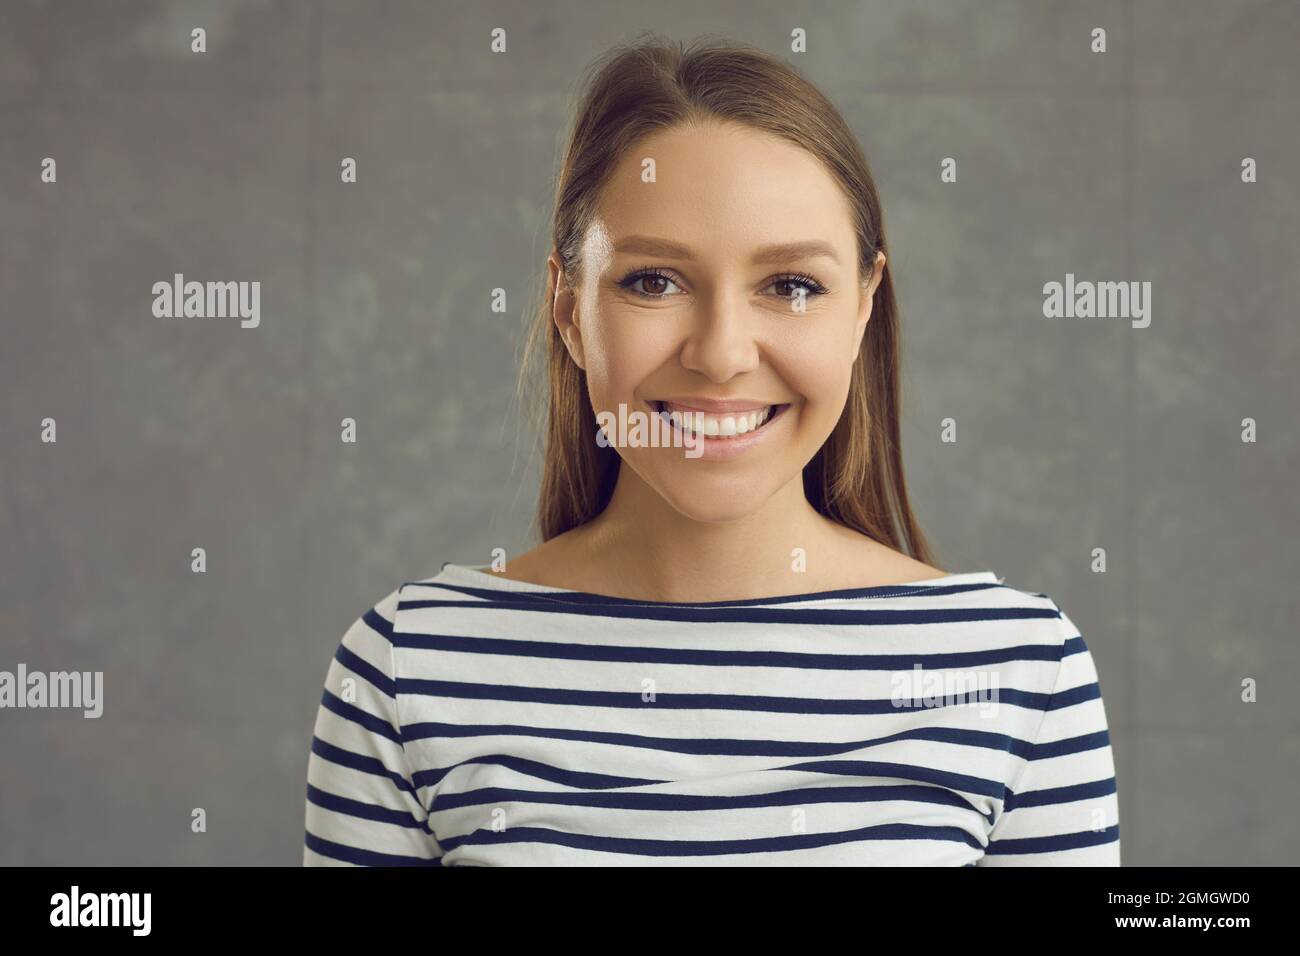 Headshot portrait of young toothy smiling woman on grey studio background Stock Photo